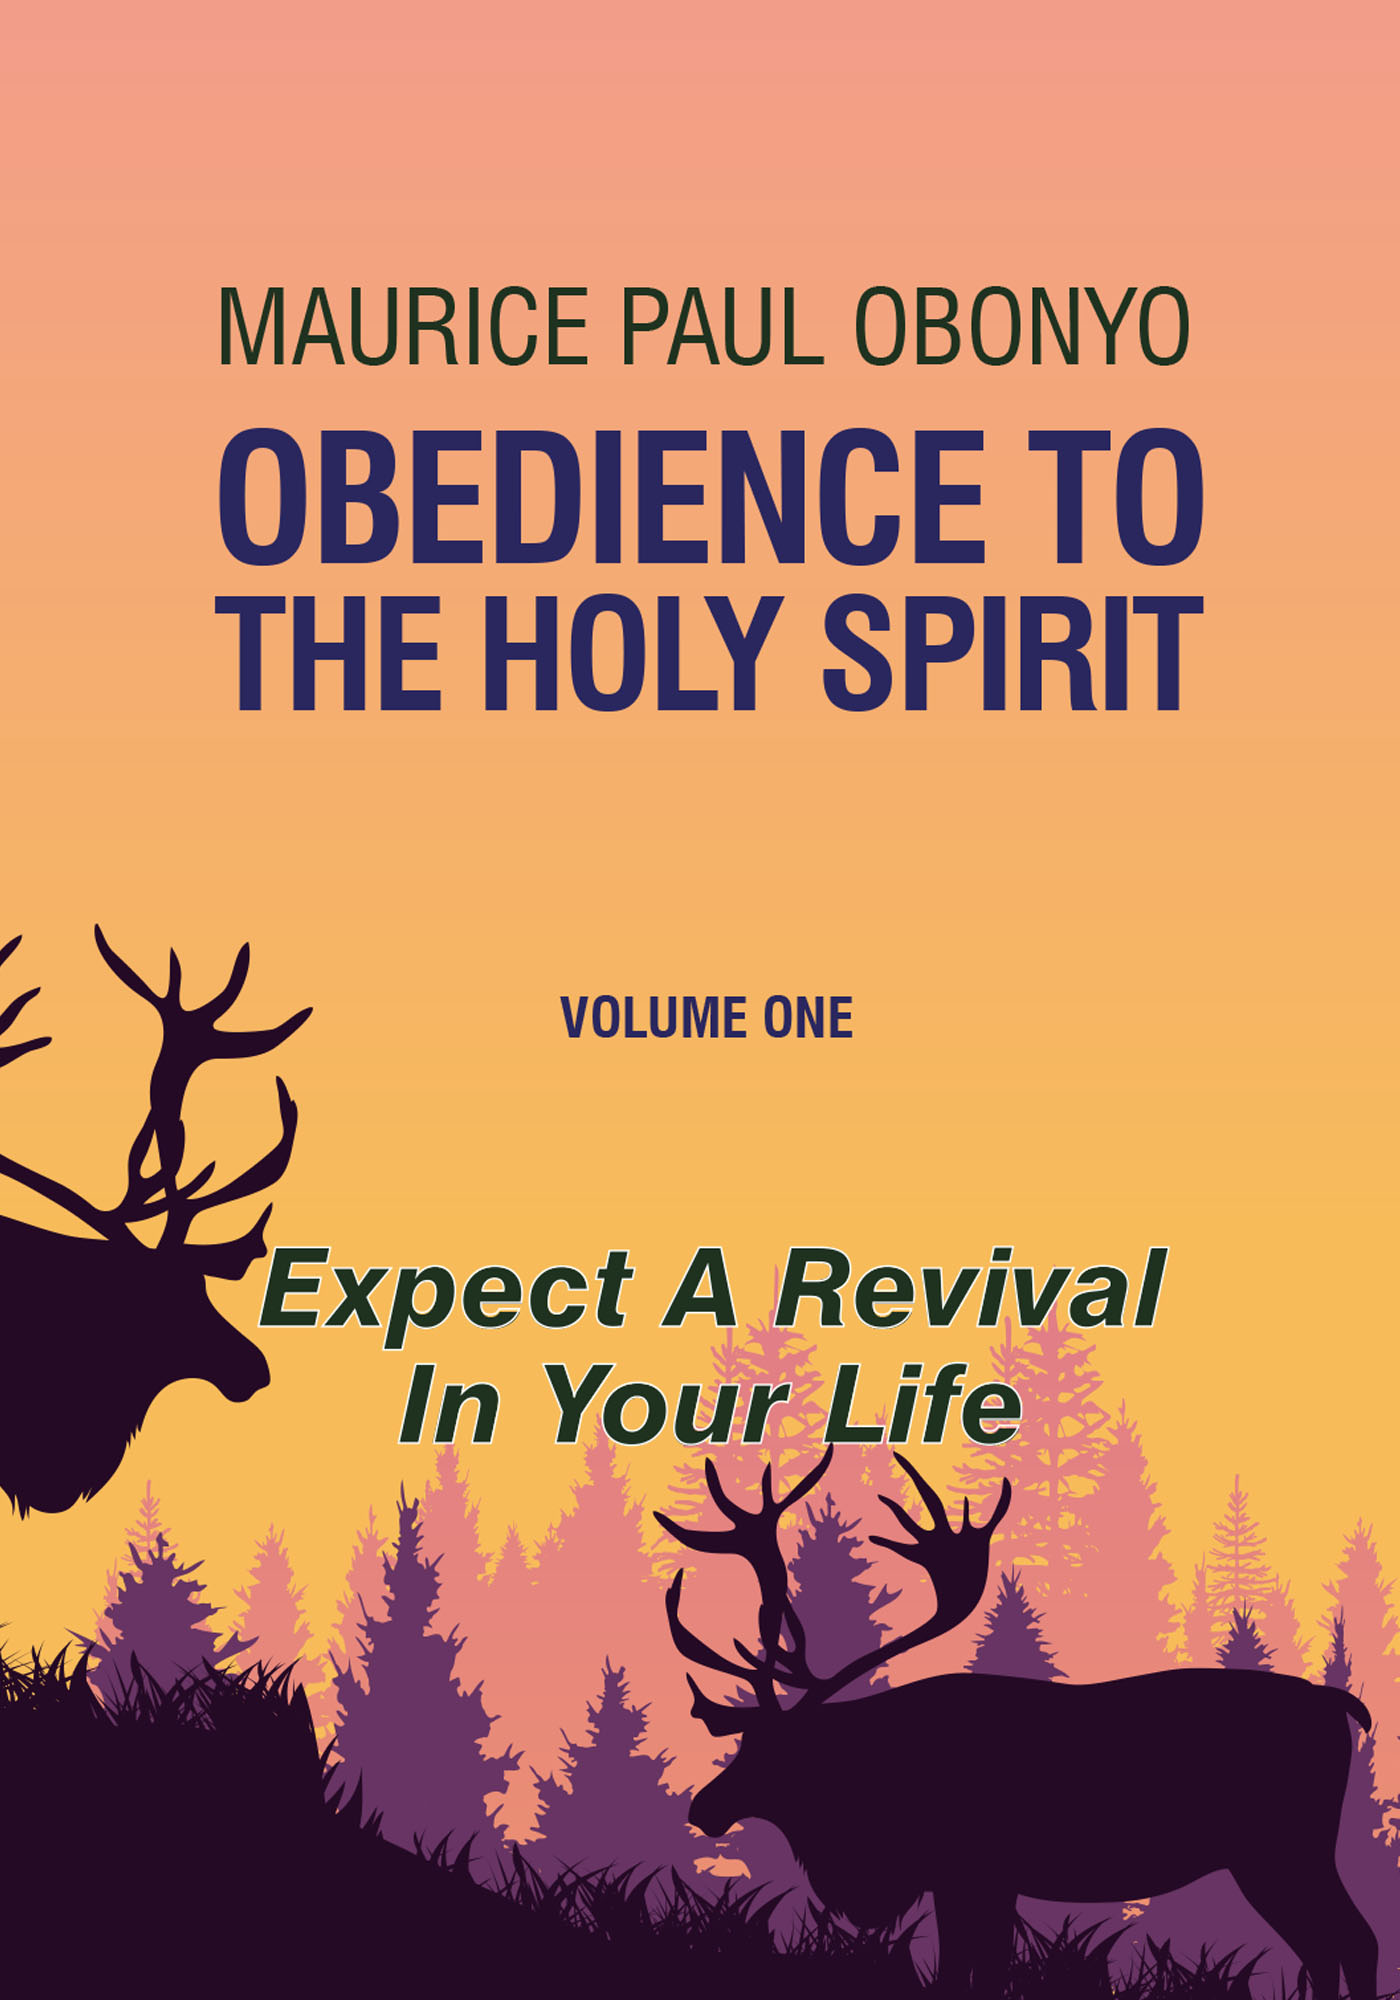 FREE: OBEDIENCE TO THE HOLY SPIRIT: Expect A Revival In Your Life by Maurice Paul Obonyo